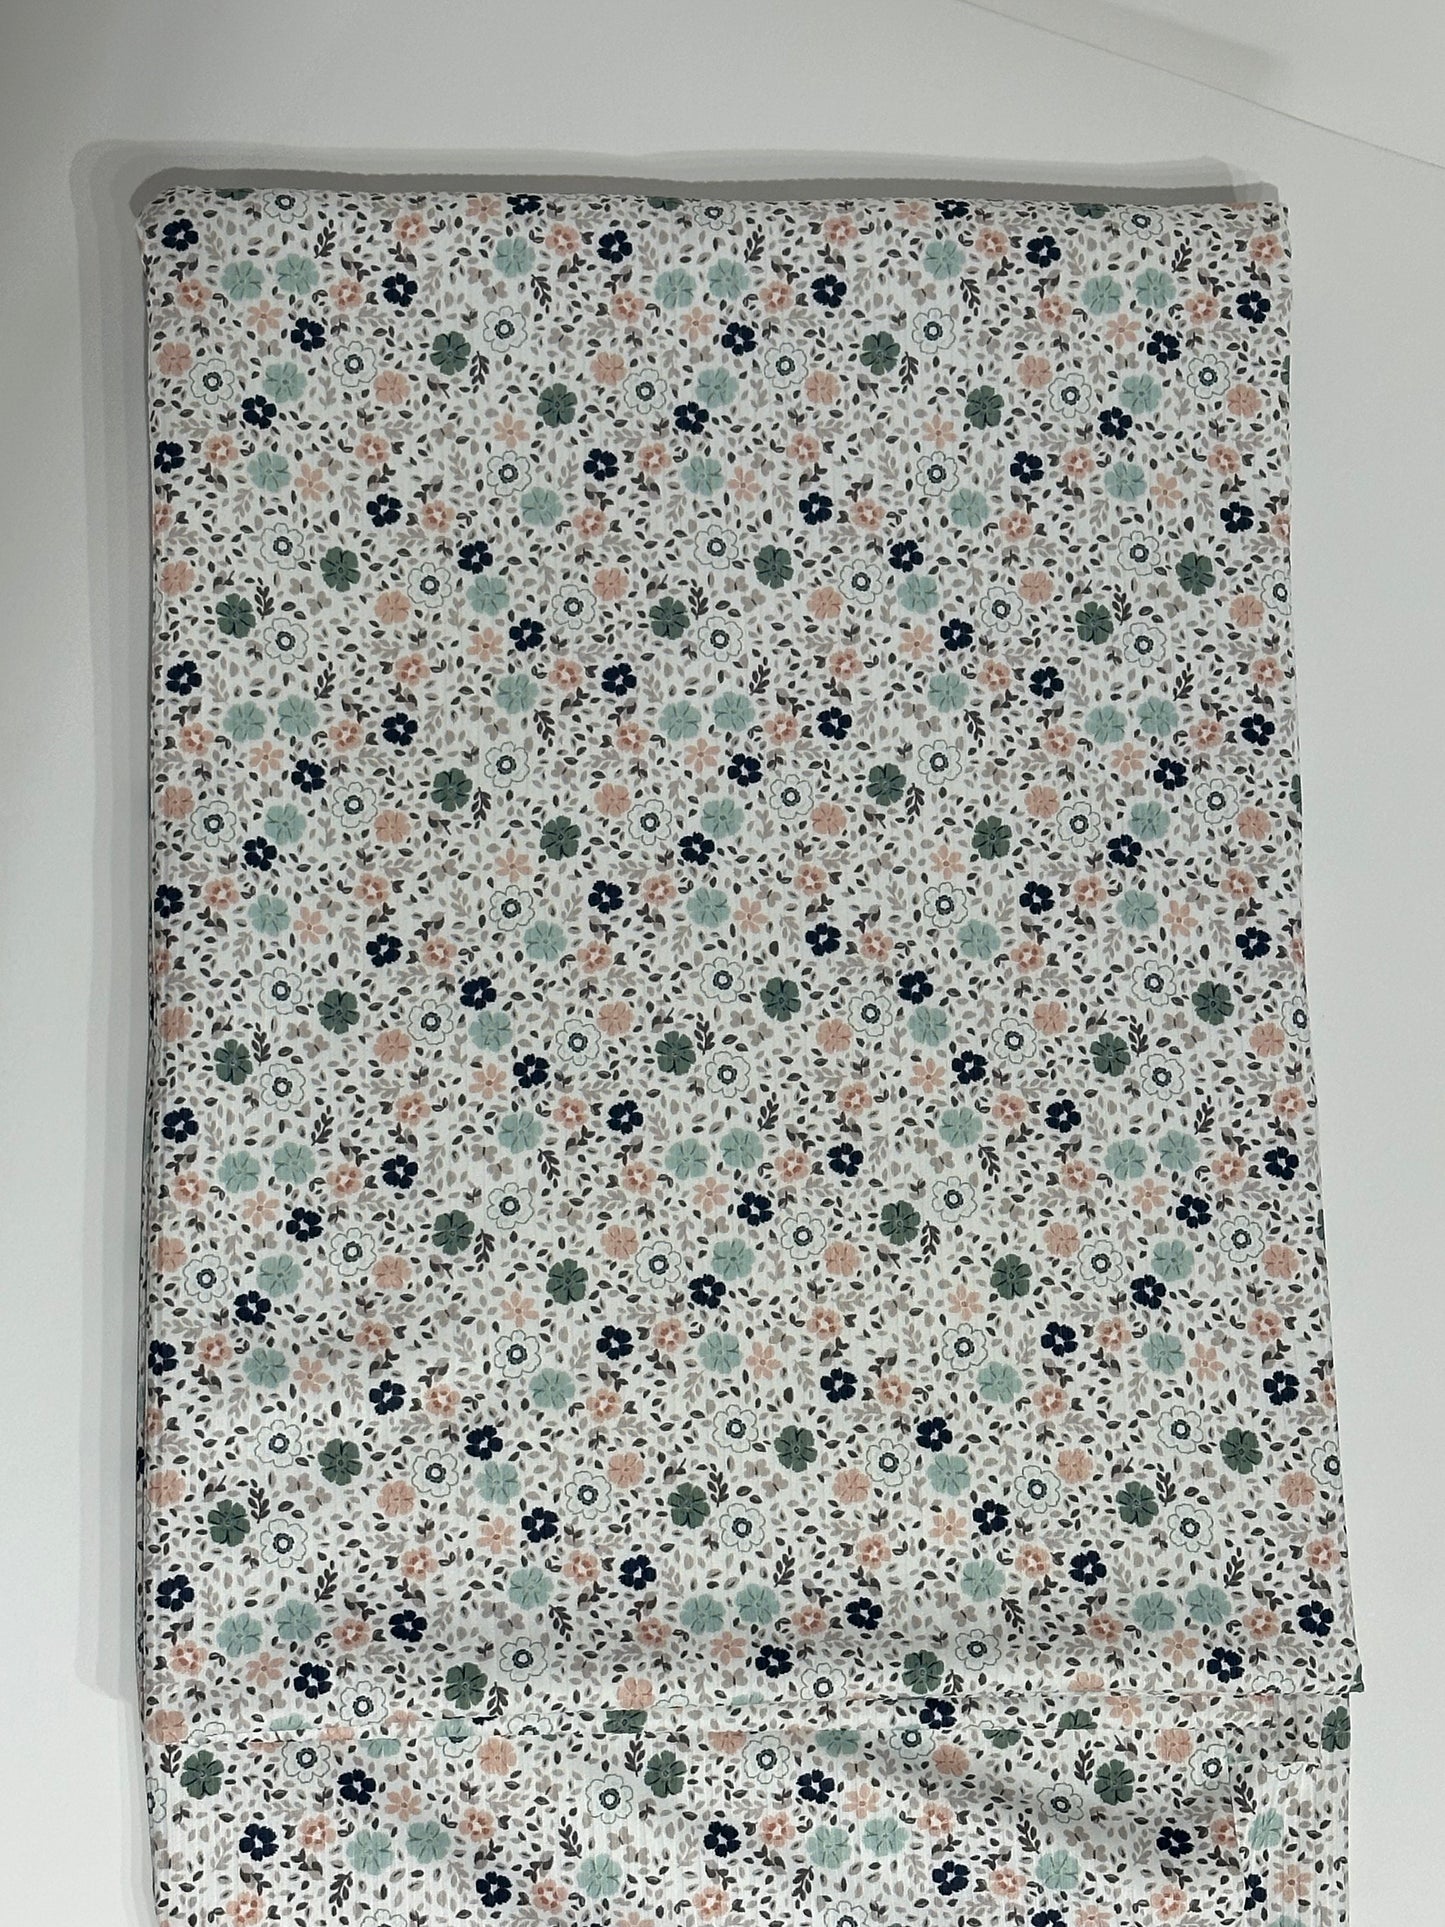 Betsy Floral in Navy on Unbrushed Rib Knit Fabric Sold by the 1/4 yard